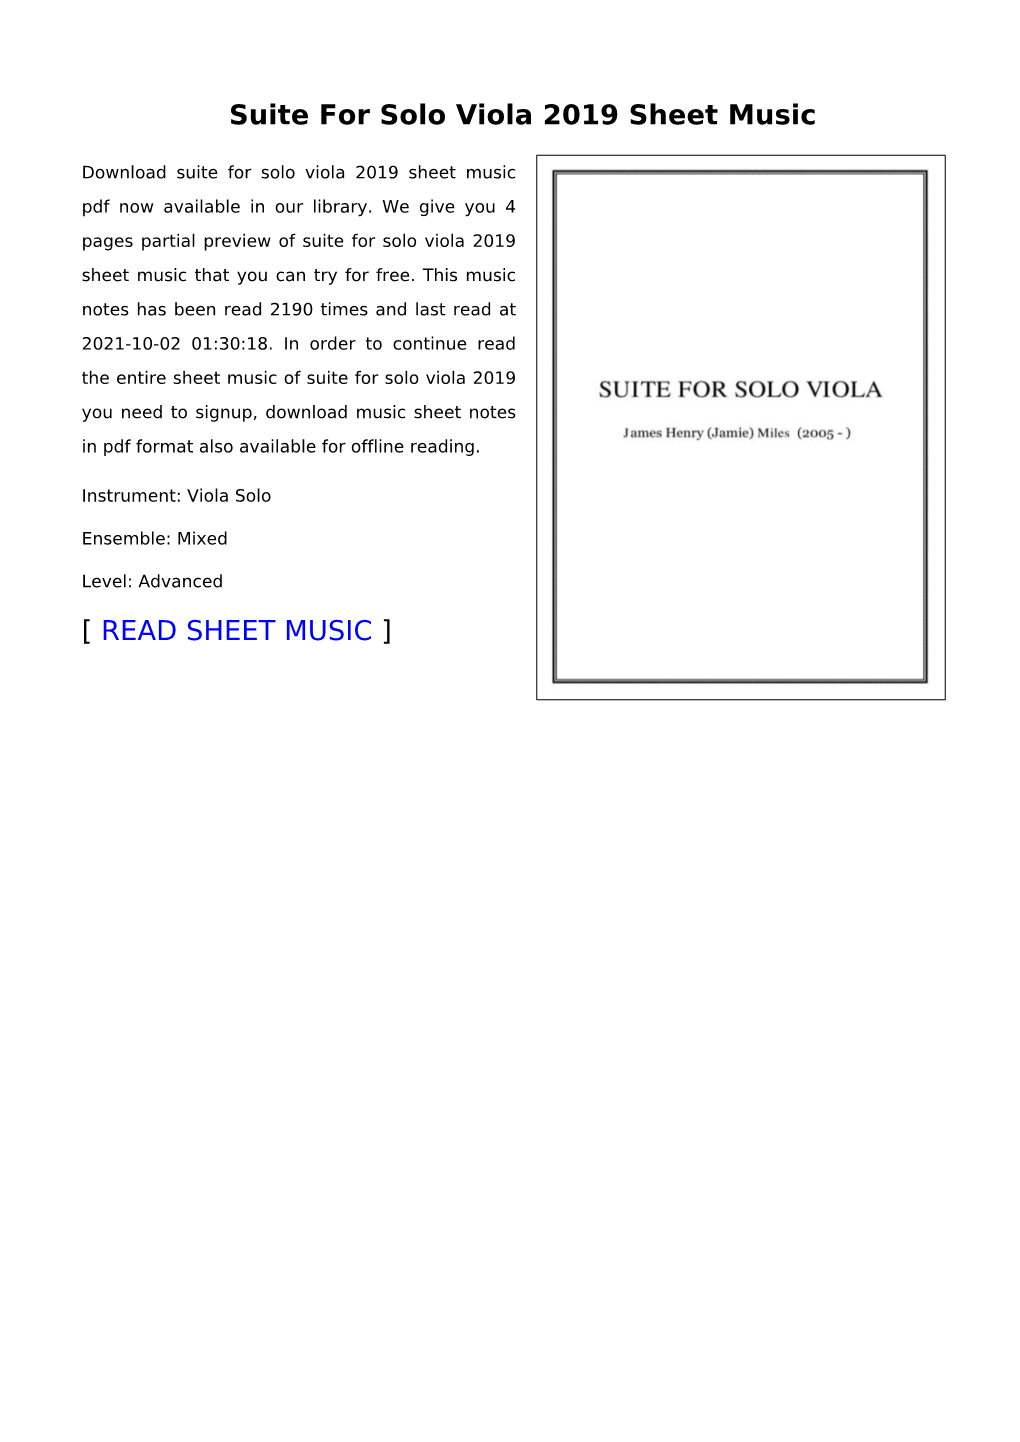 Suite for Solo Viola 2019 Sheet Music